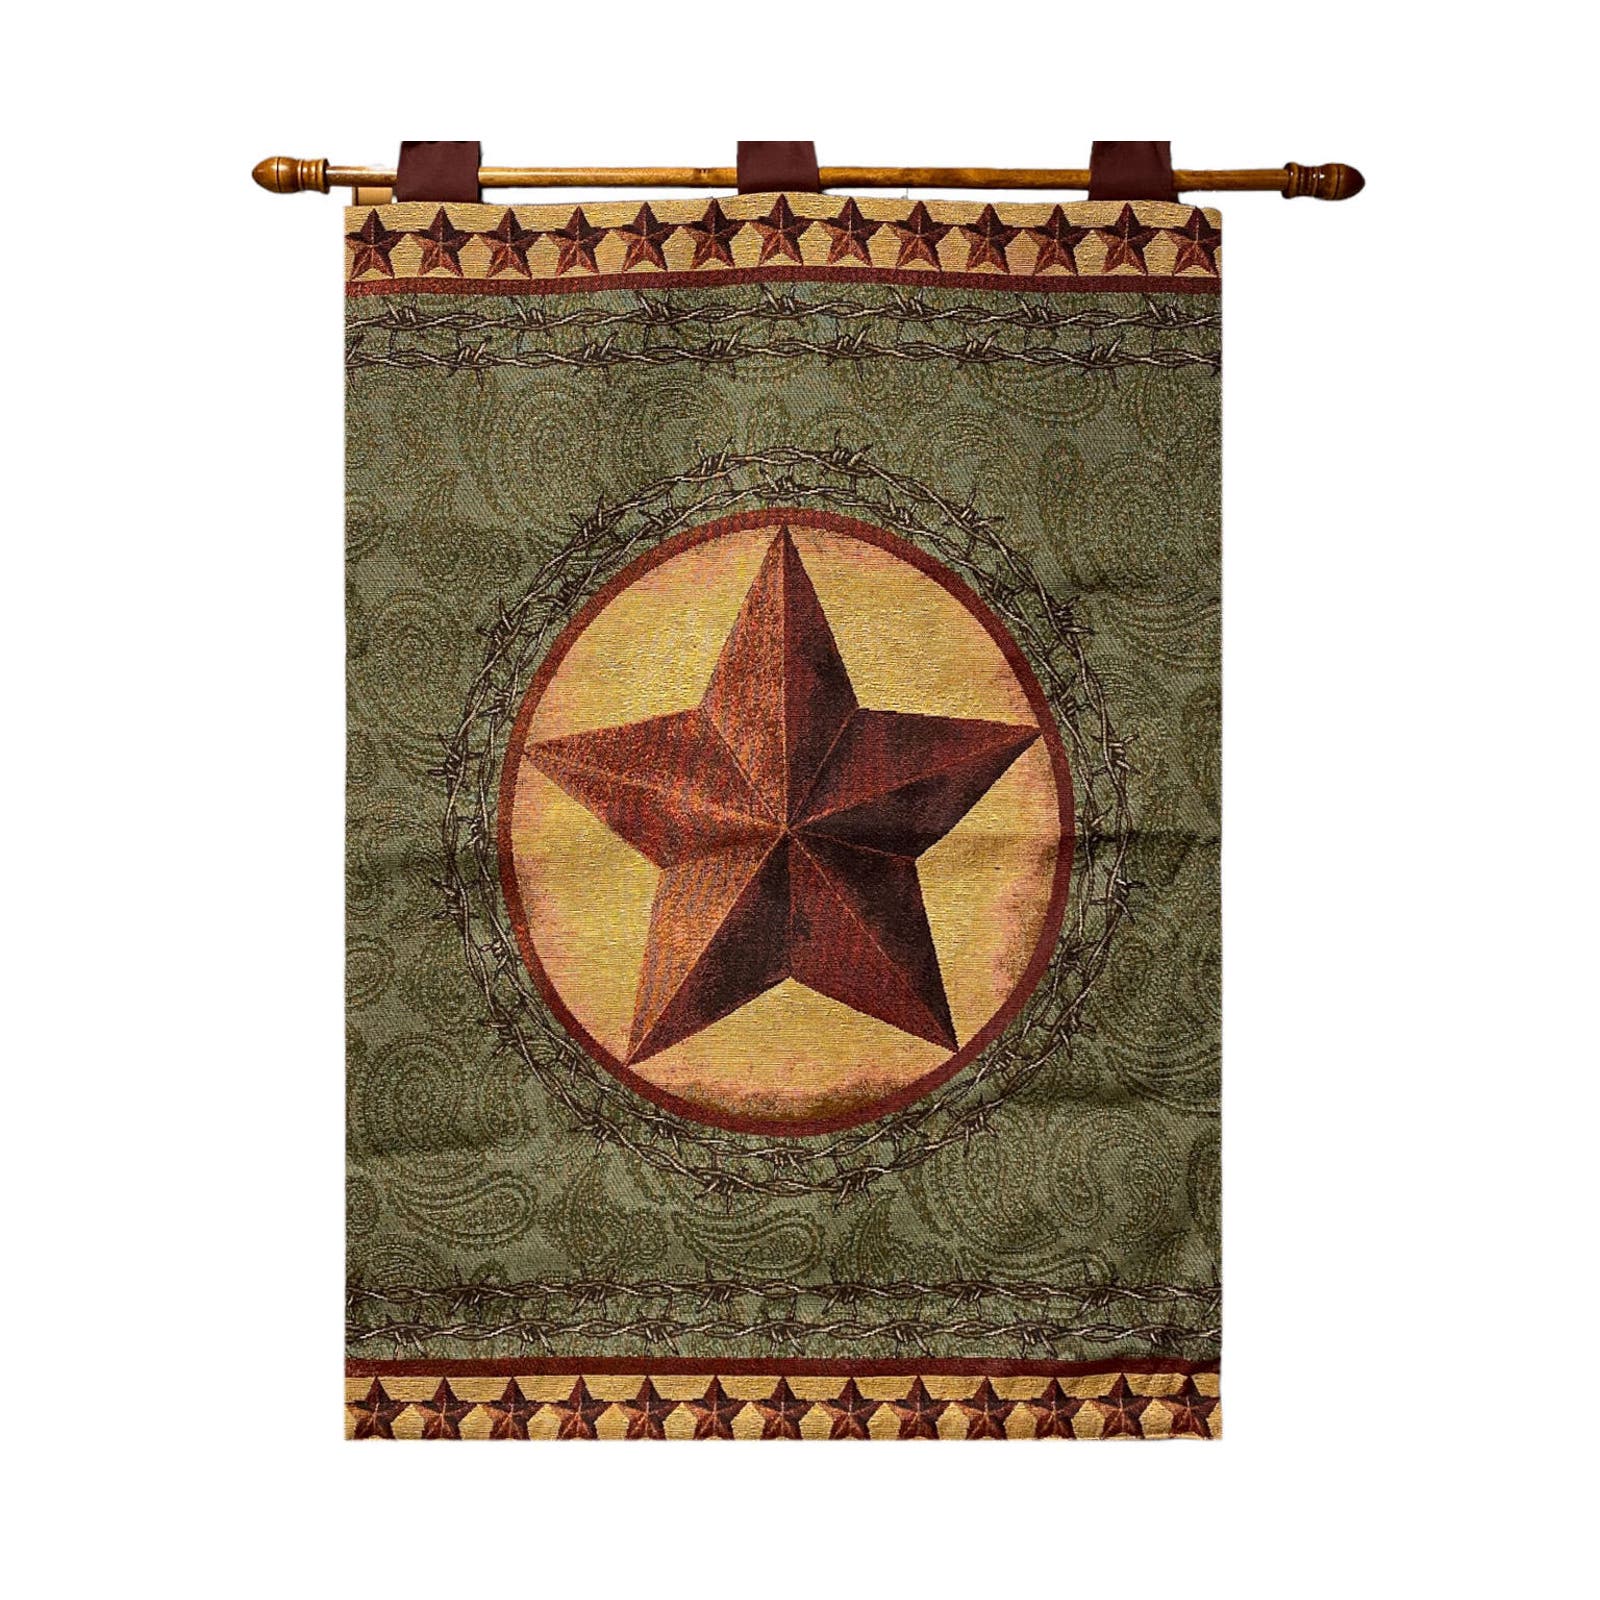 Texas Star Tapestry Wall Hanging with Wood Rod Southwestern 26x36" NWT